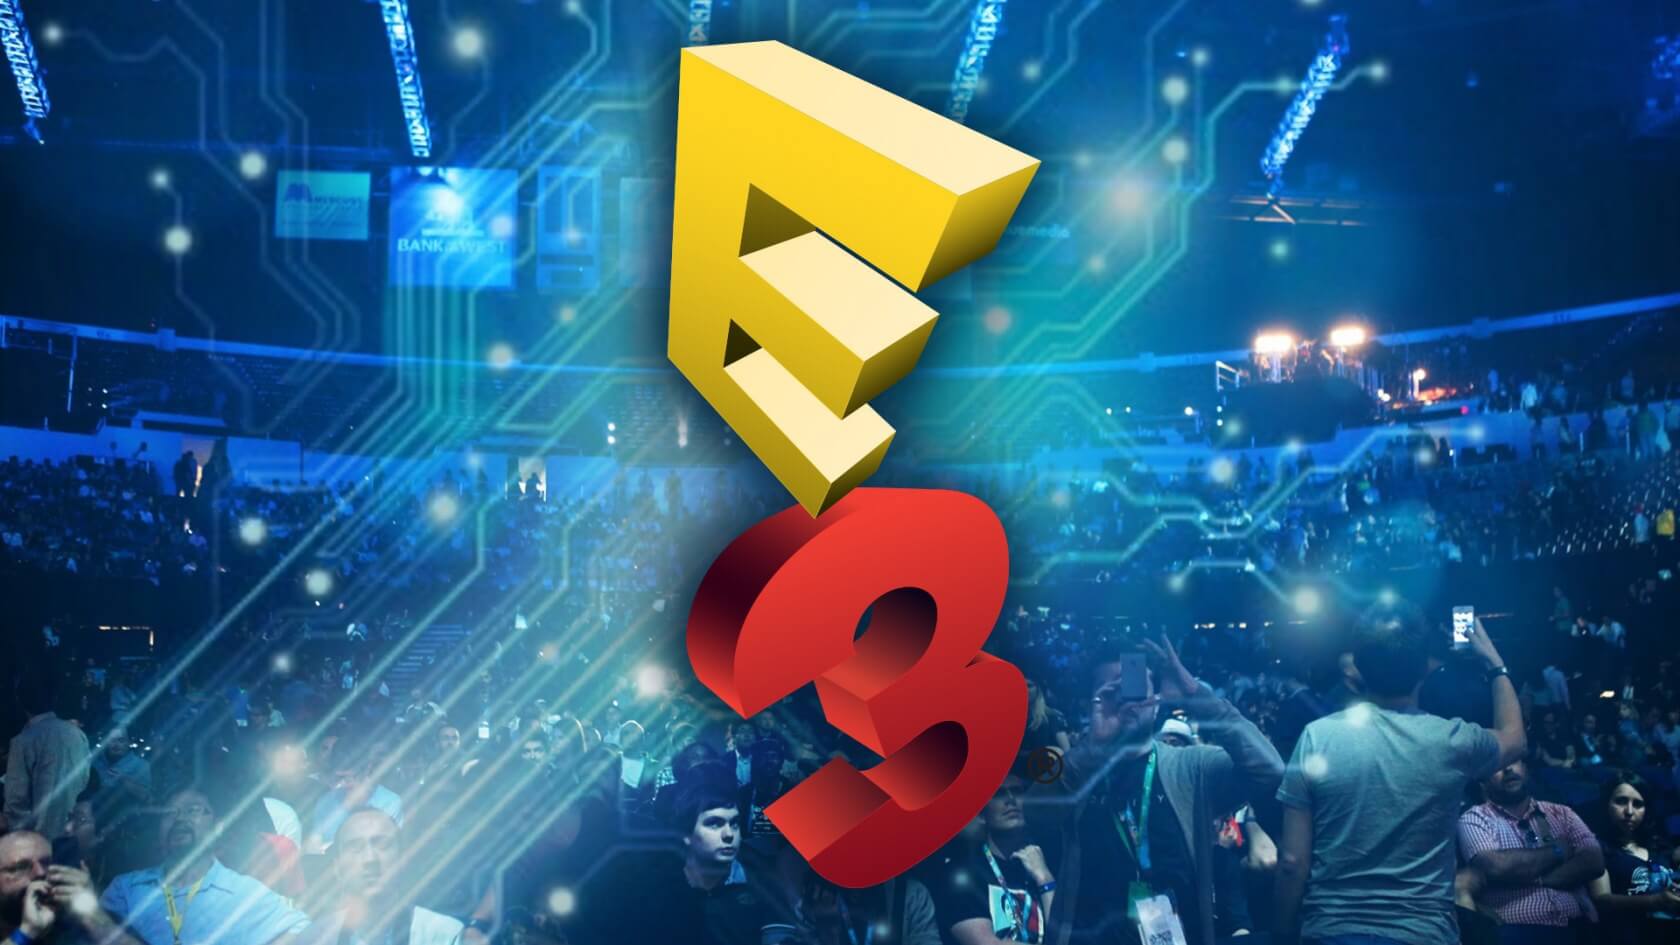 E3 2018 preview: what to expect from the big video game event